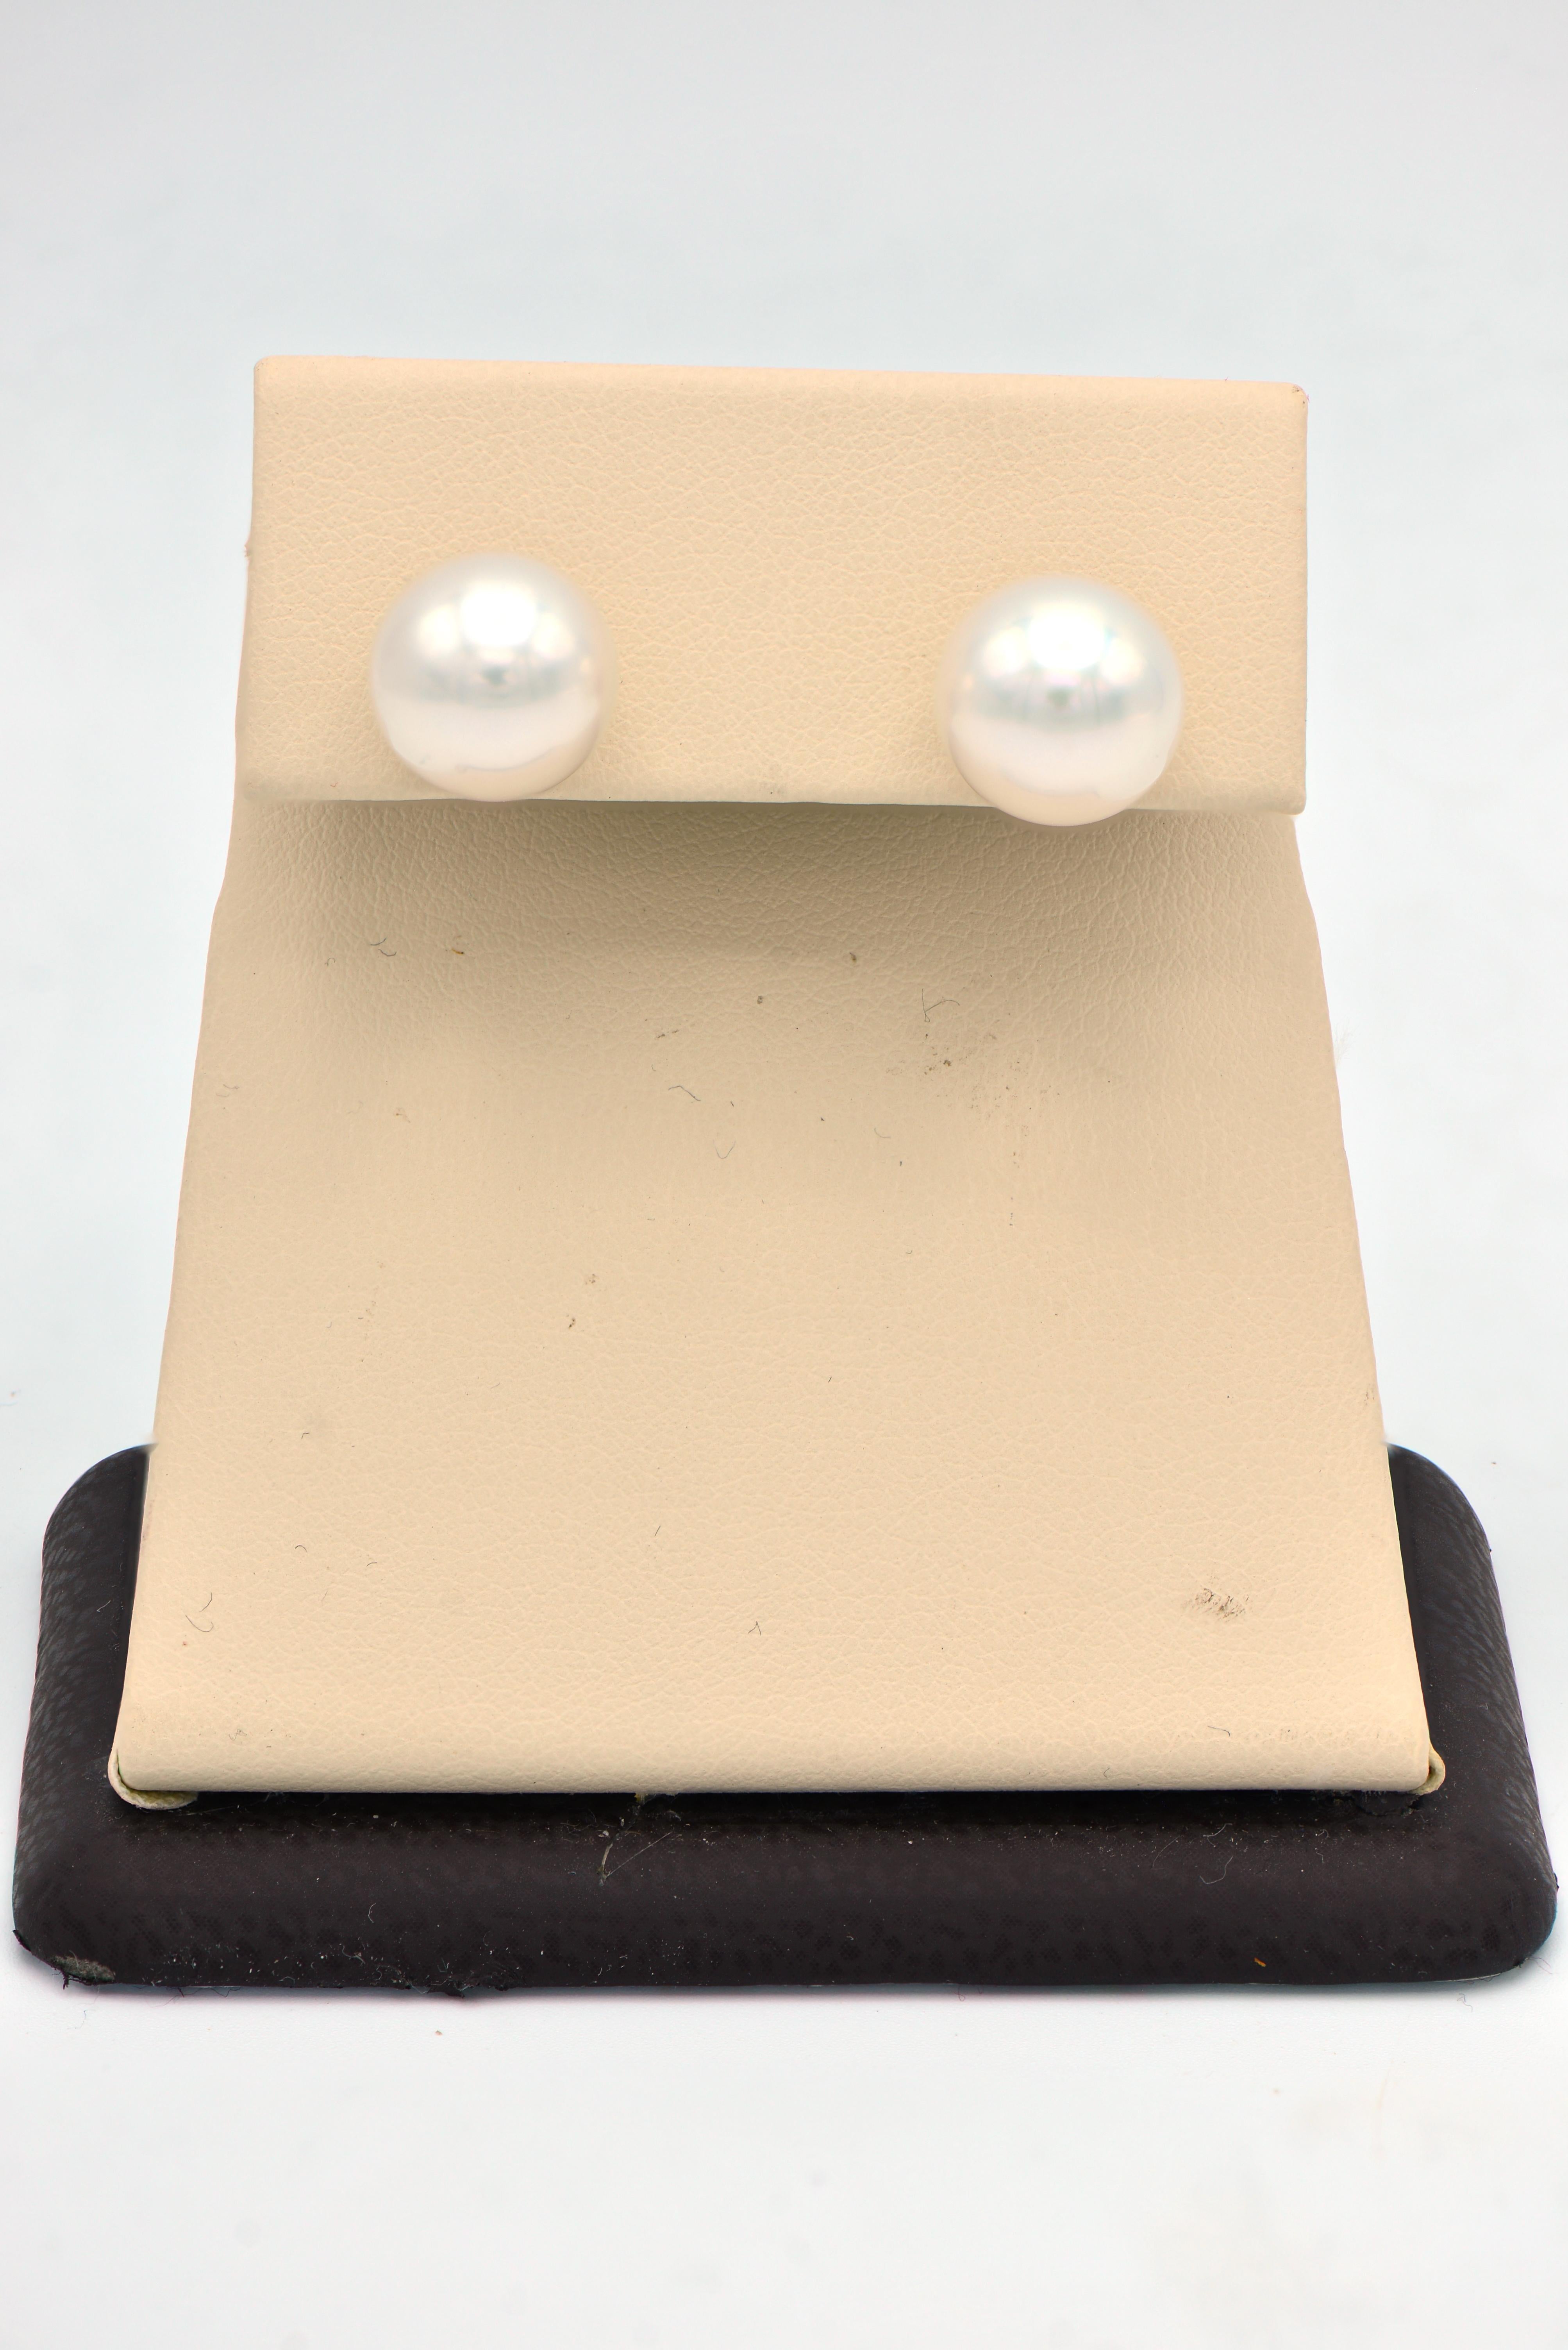 Contemporary 10.5-11mm South Sea Pearl Stud Earrings with 14 Karat White Gold Posts and Backs For Sale